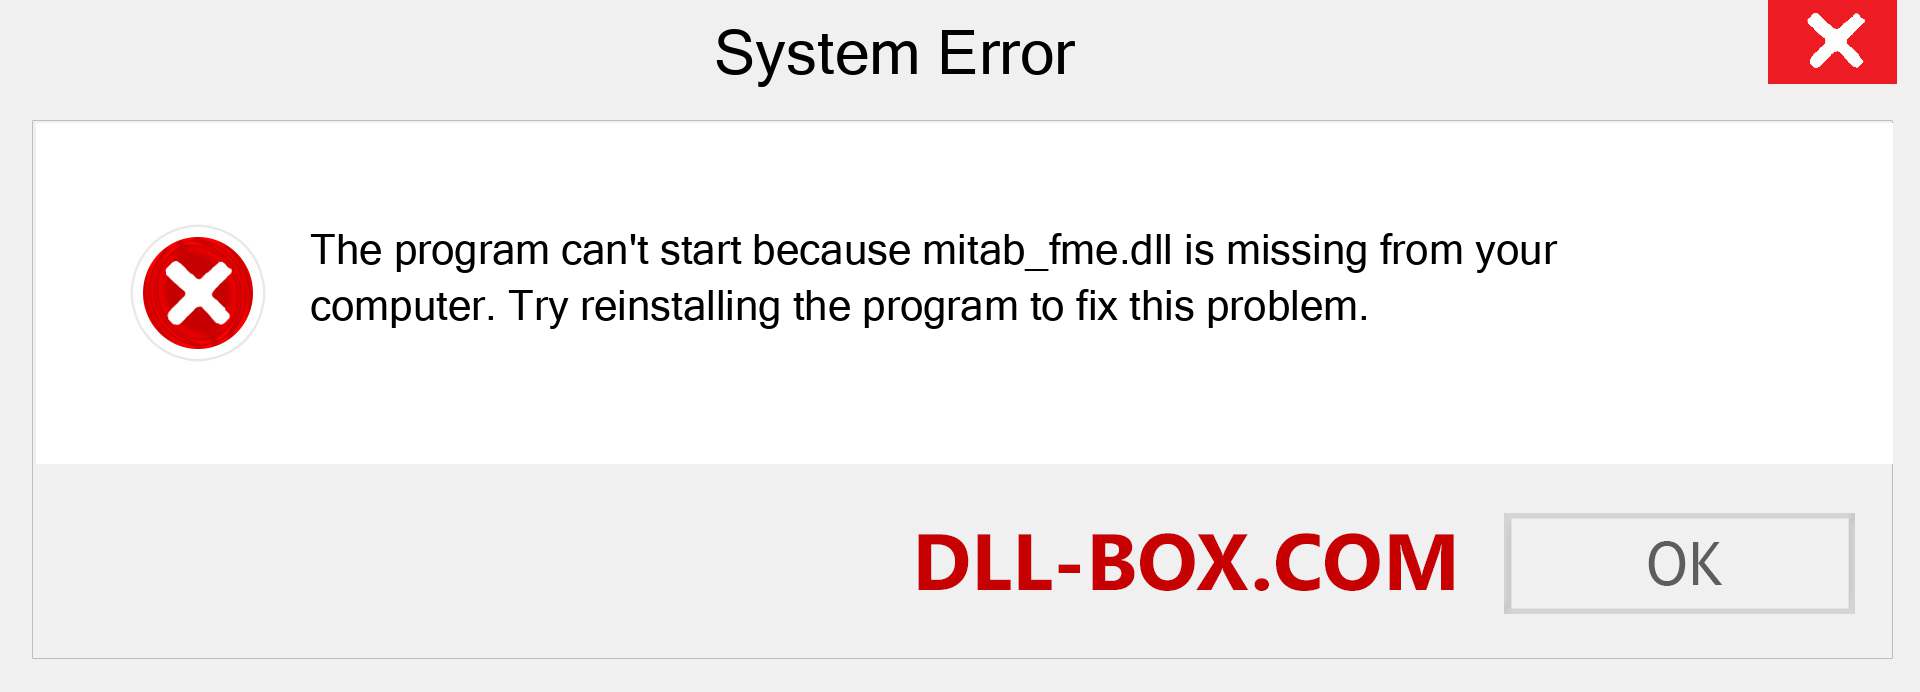  mitab_fme.dll file is missing?. Download for Windows 7, 8, 10 - Fix  mitab_fme dll Missing Error on Windows, photos, images